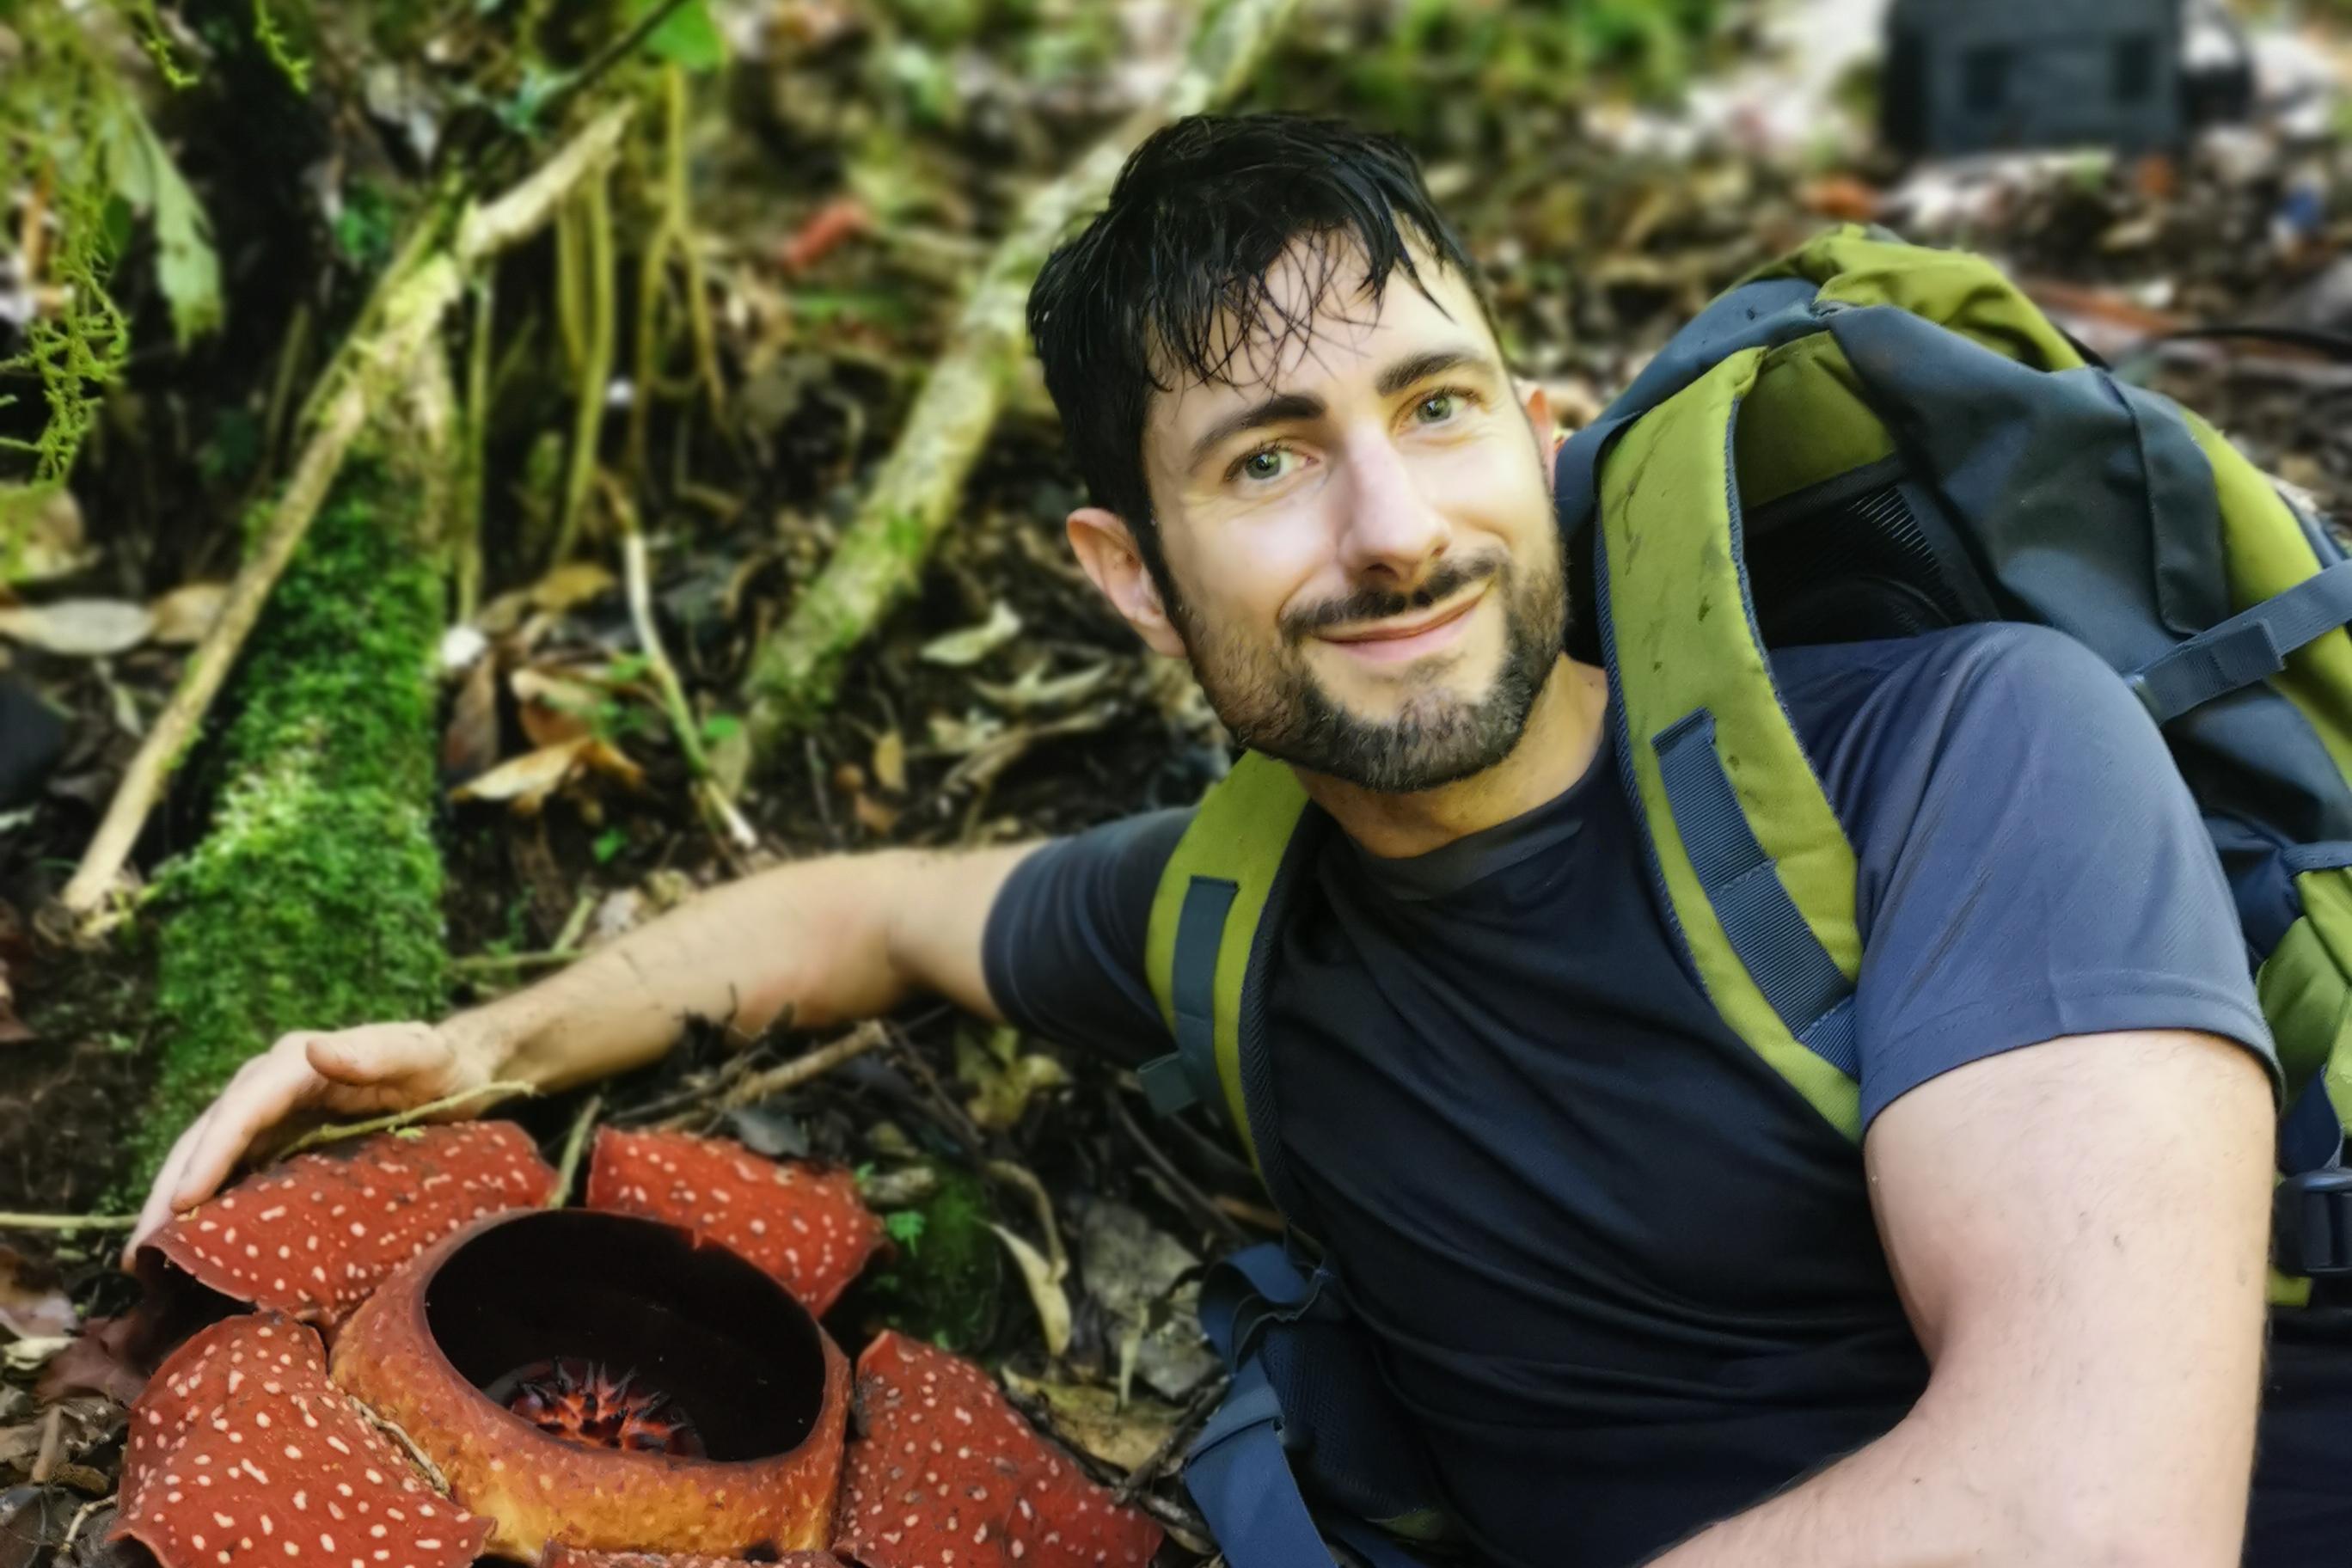 Chris Botanist siiting next to a Rafflesia flower in the forest